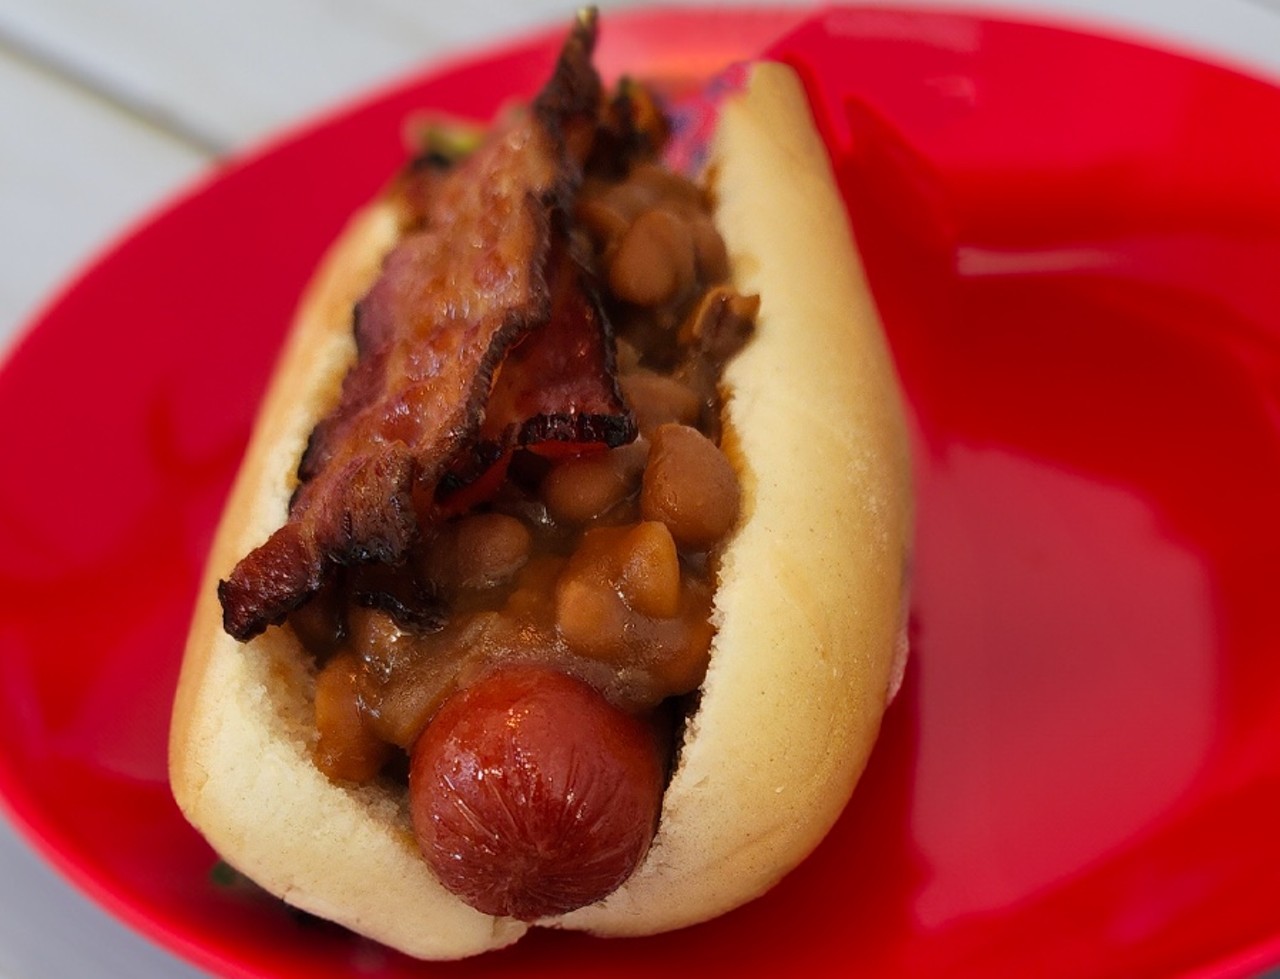 Campfire Dog 
An all beef hotdog topped with baked beans and applewood bacon.
Location: DeAnna's Donut Burger